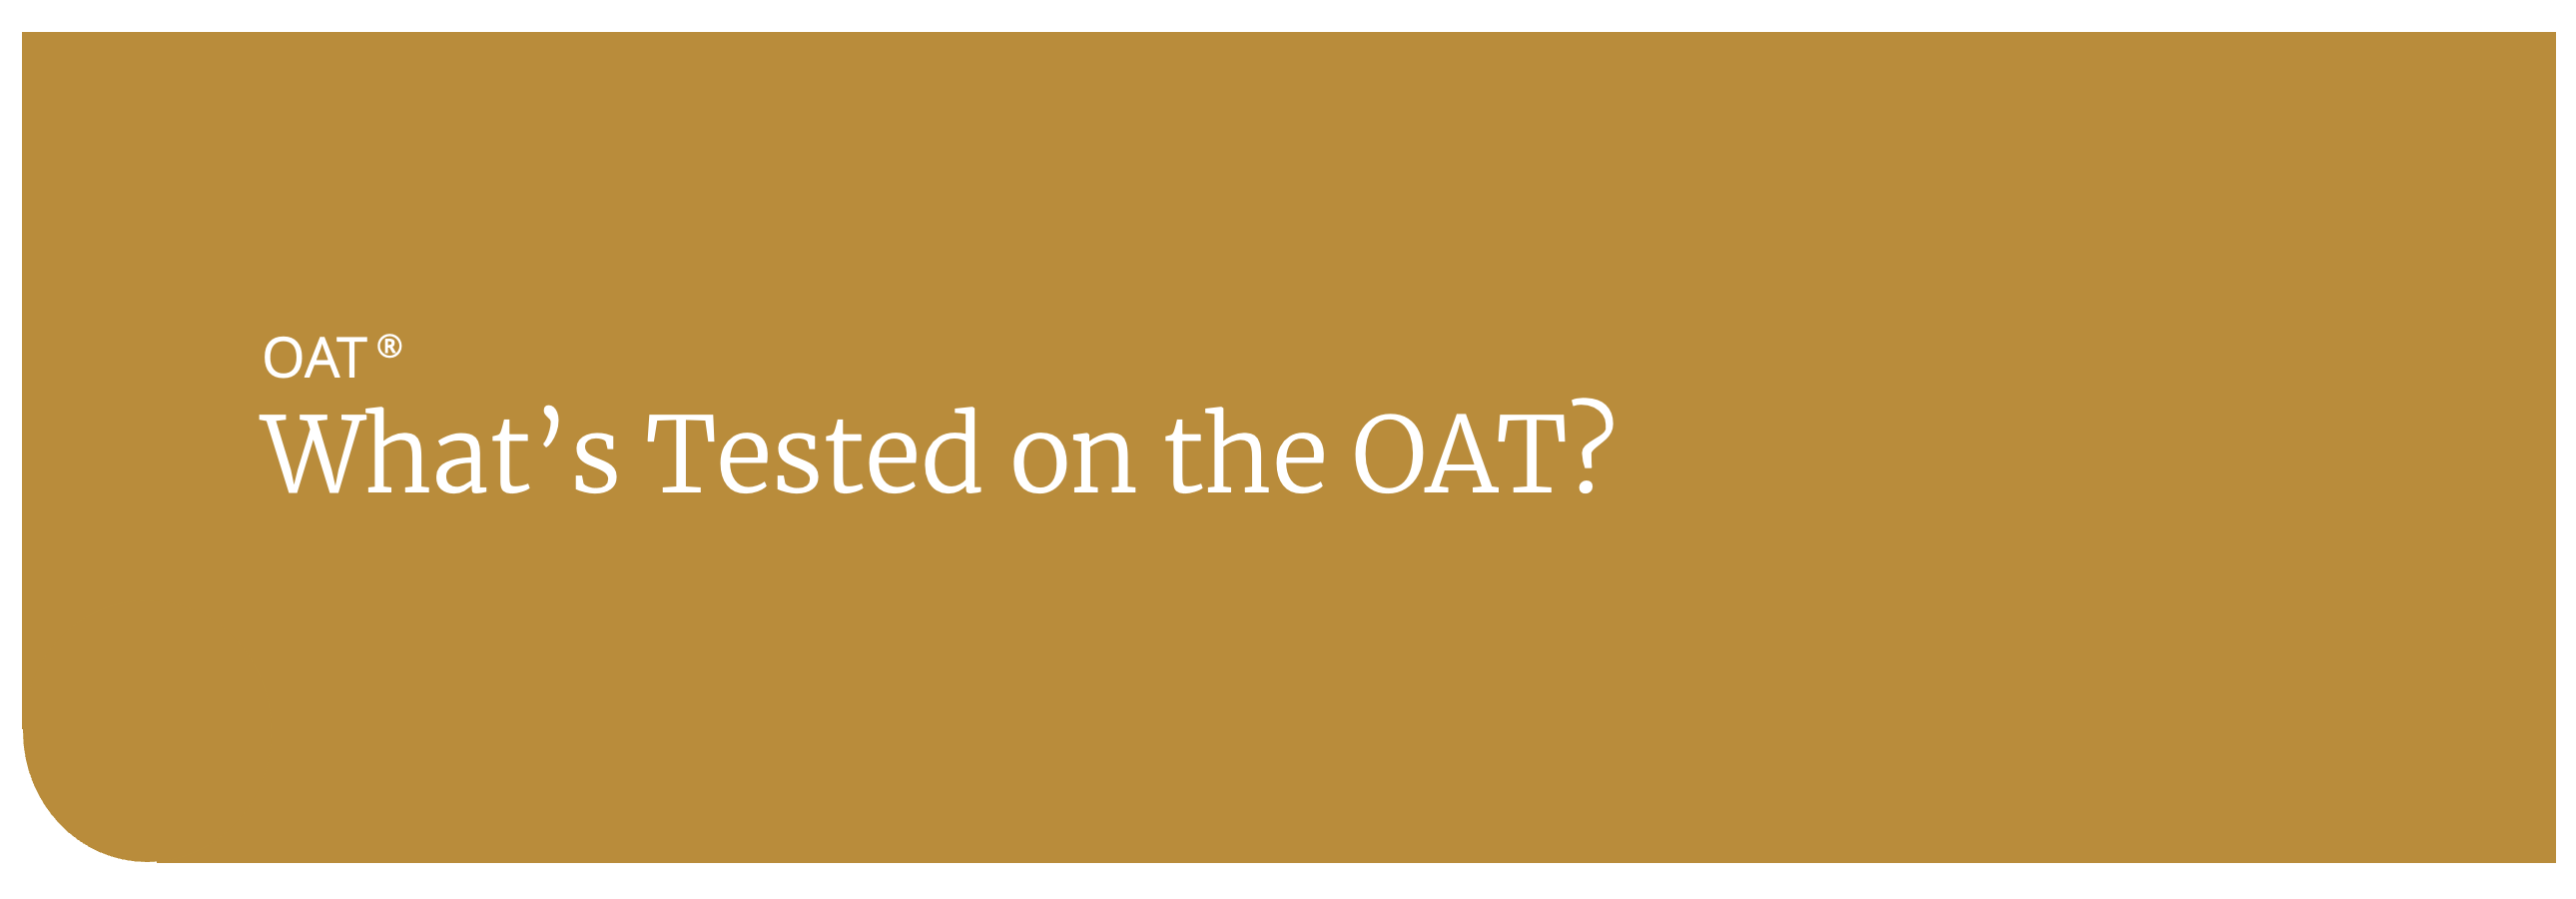 https://www.kaptest.com/study/wp-content/uploads/whats-tested-on-the-oat.png